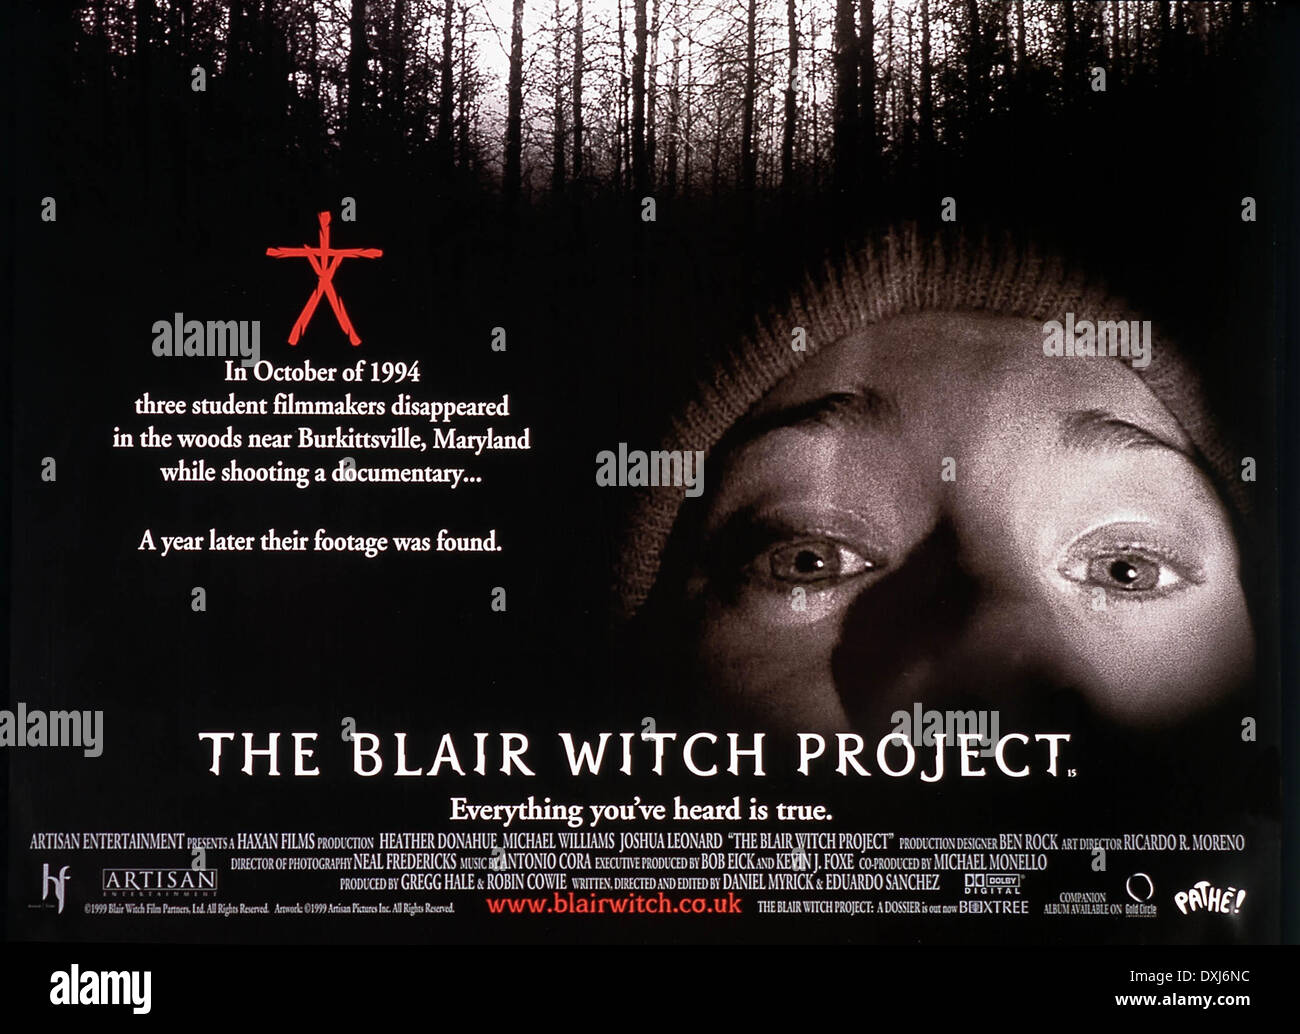 BLAIR WITCH PROJECT Stockfoto